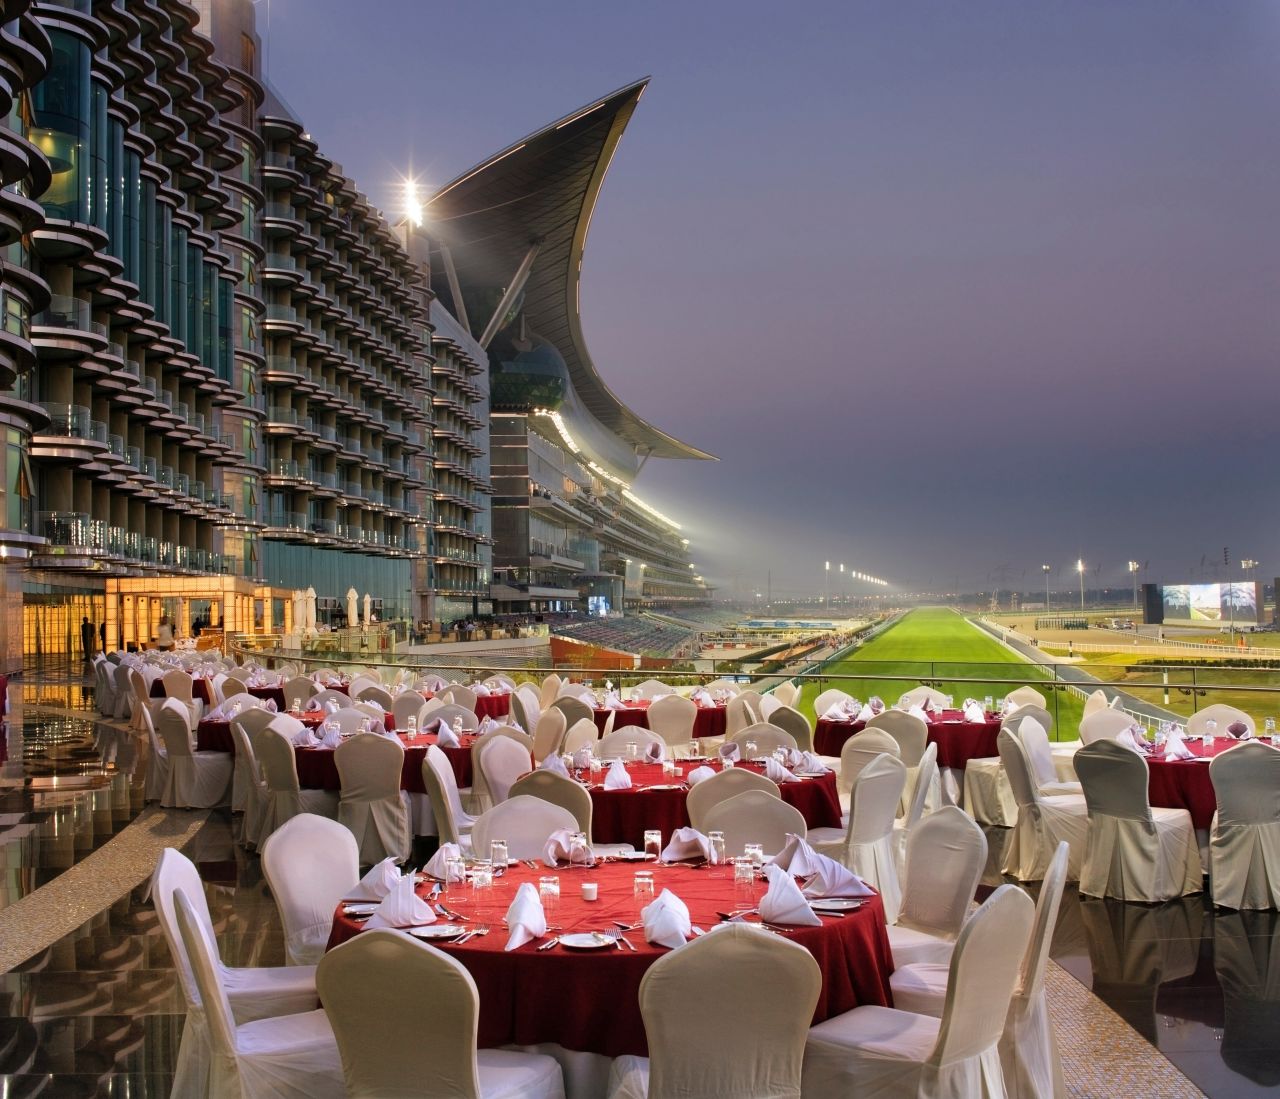 Fittingly for a course that stages such a prestigious event, and cost a reported $1 billion to build, trackside dining at the Meydan can take place in a variety of spectacular settings. 